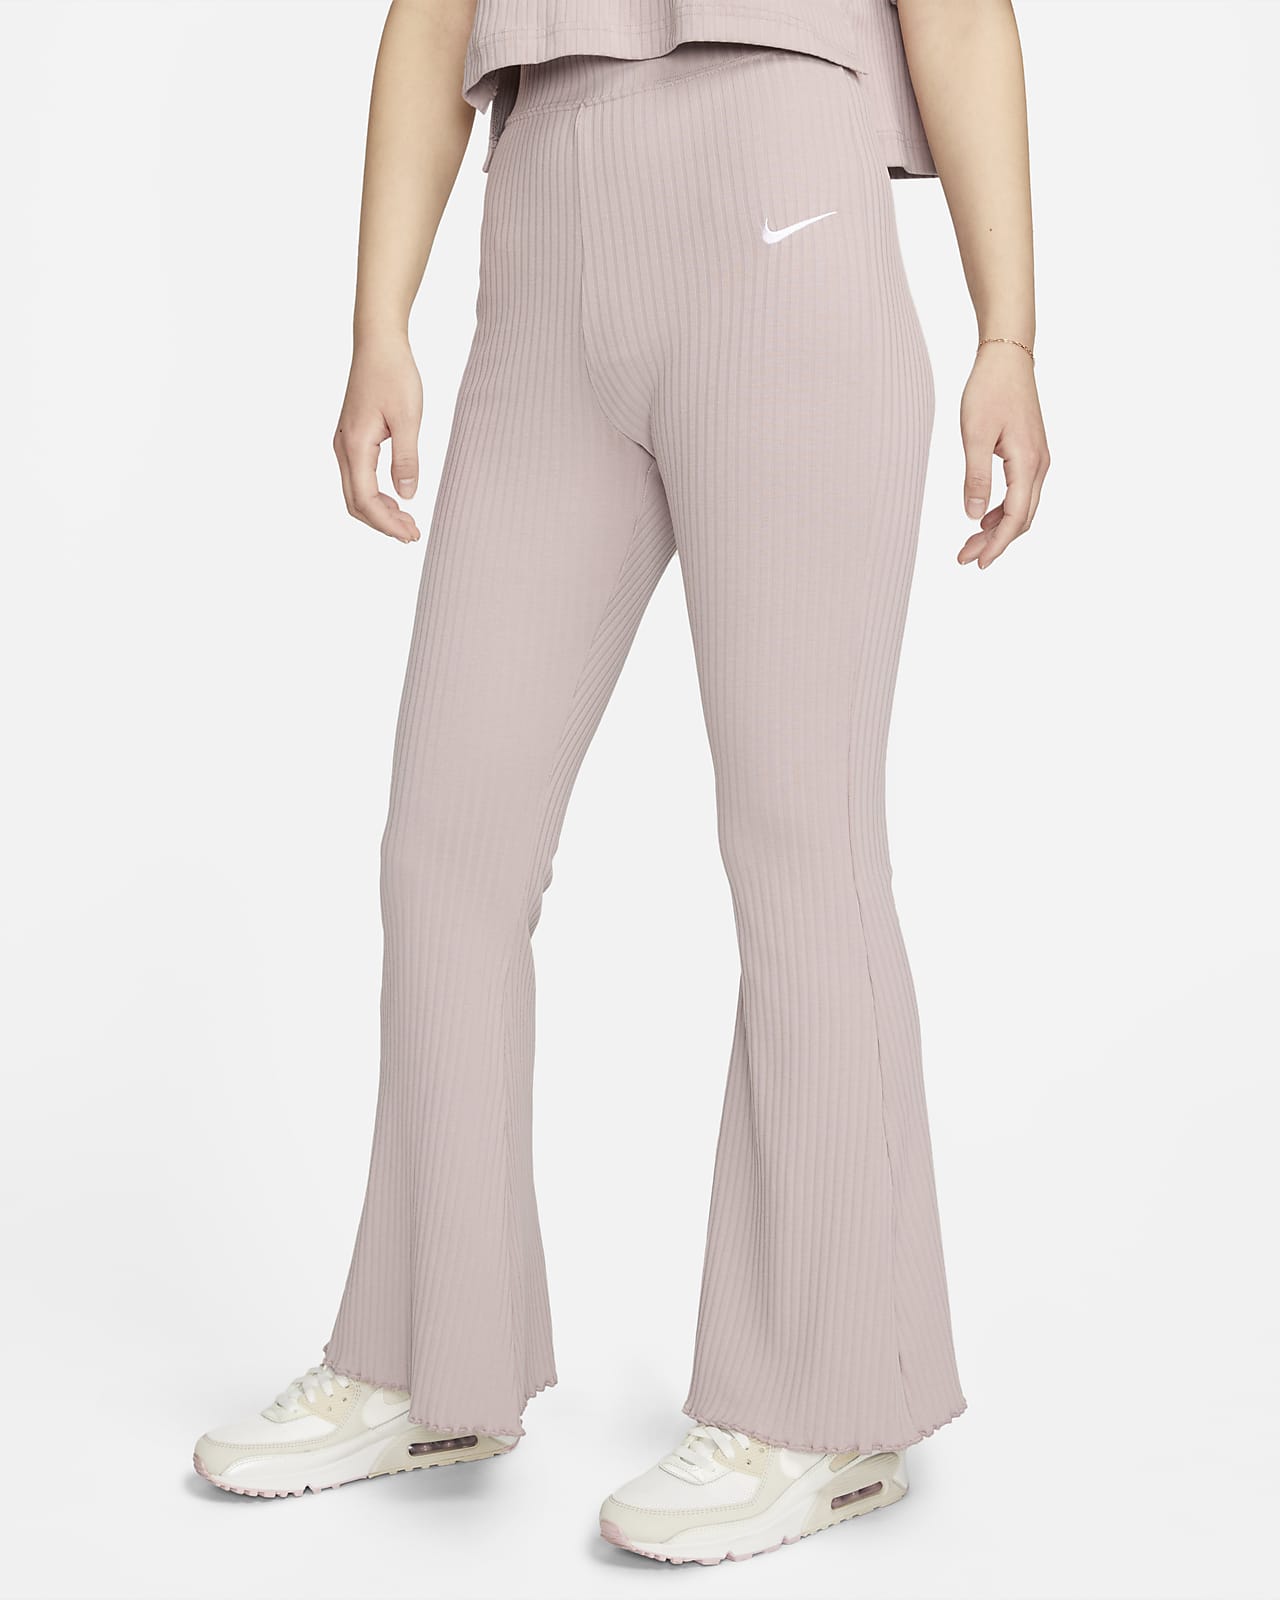 https://static.nike.com/a/images/t_PDP_1280_v1/f_auto,q_auto:eco/0ebc683b-b671-472c-88dd-3c0dc6a0fe8d/sportswear-womens-high-waisted-ribbed-jersey-pants-8xznKV.png